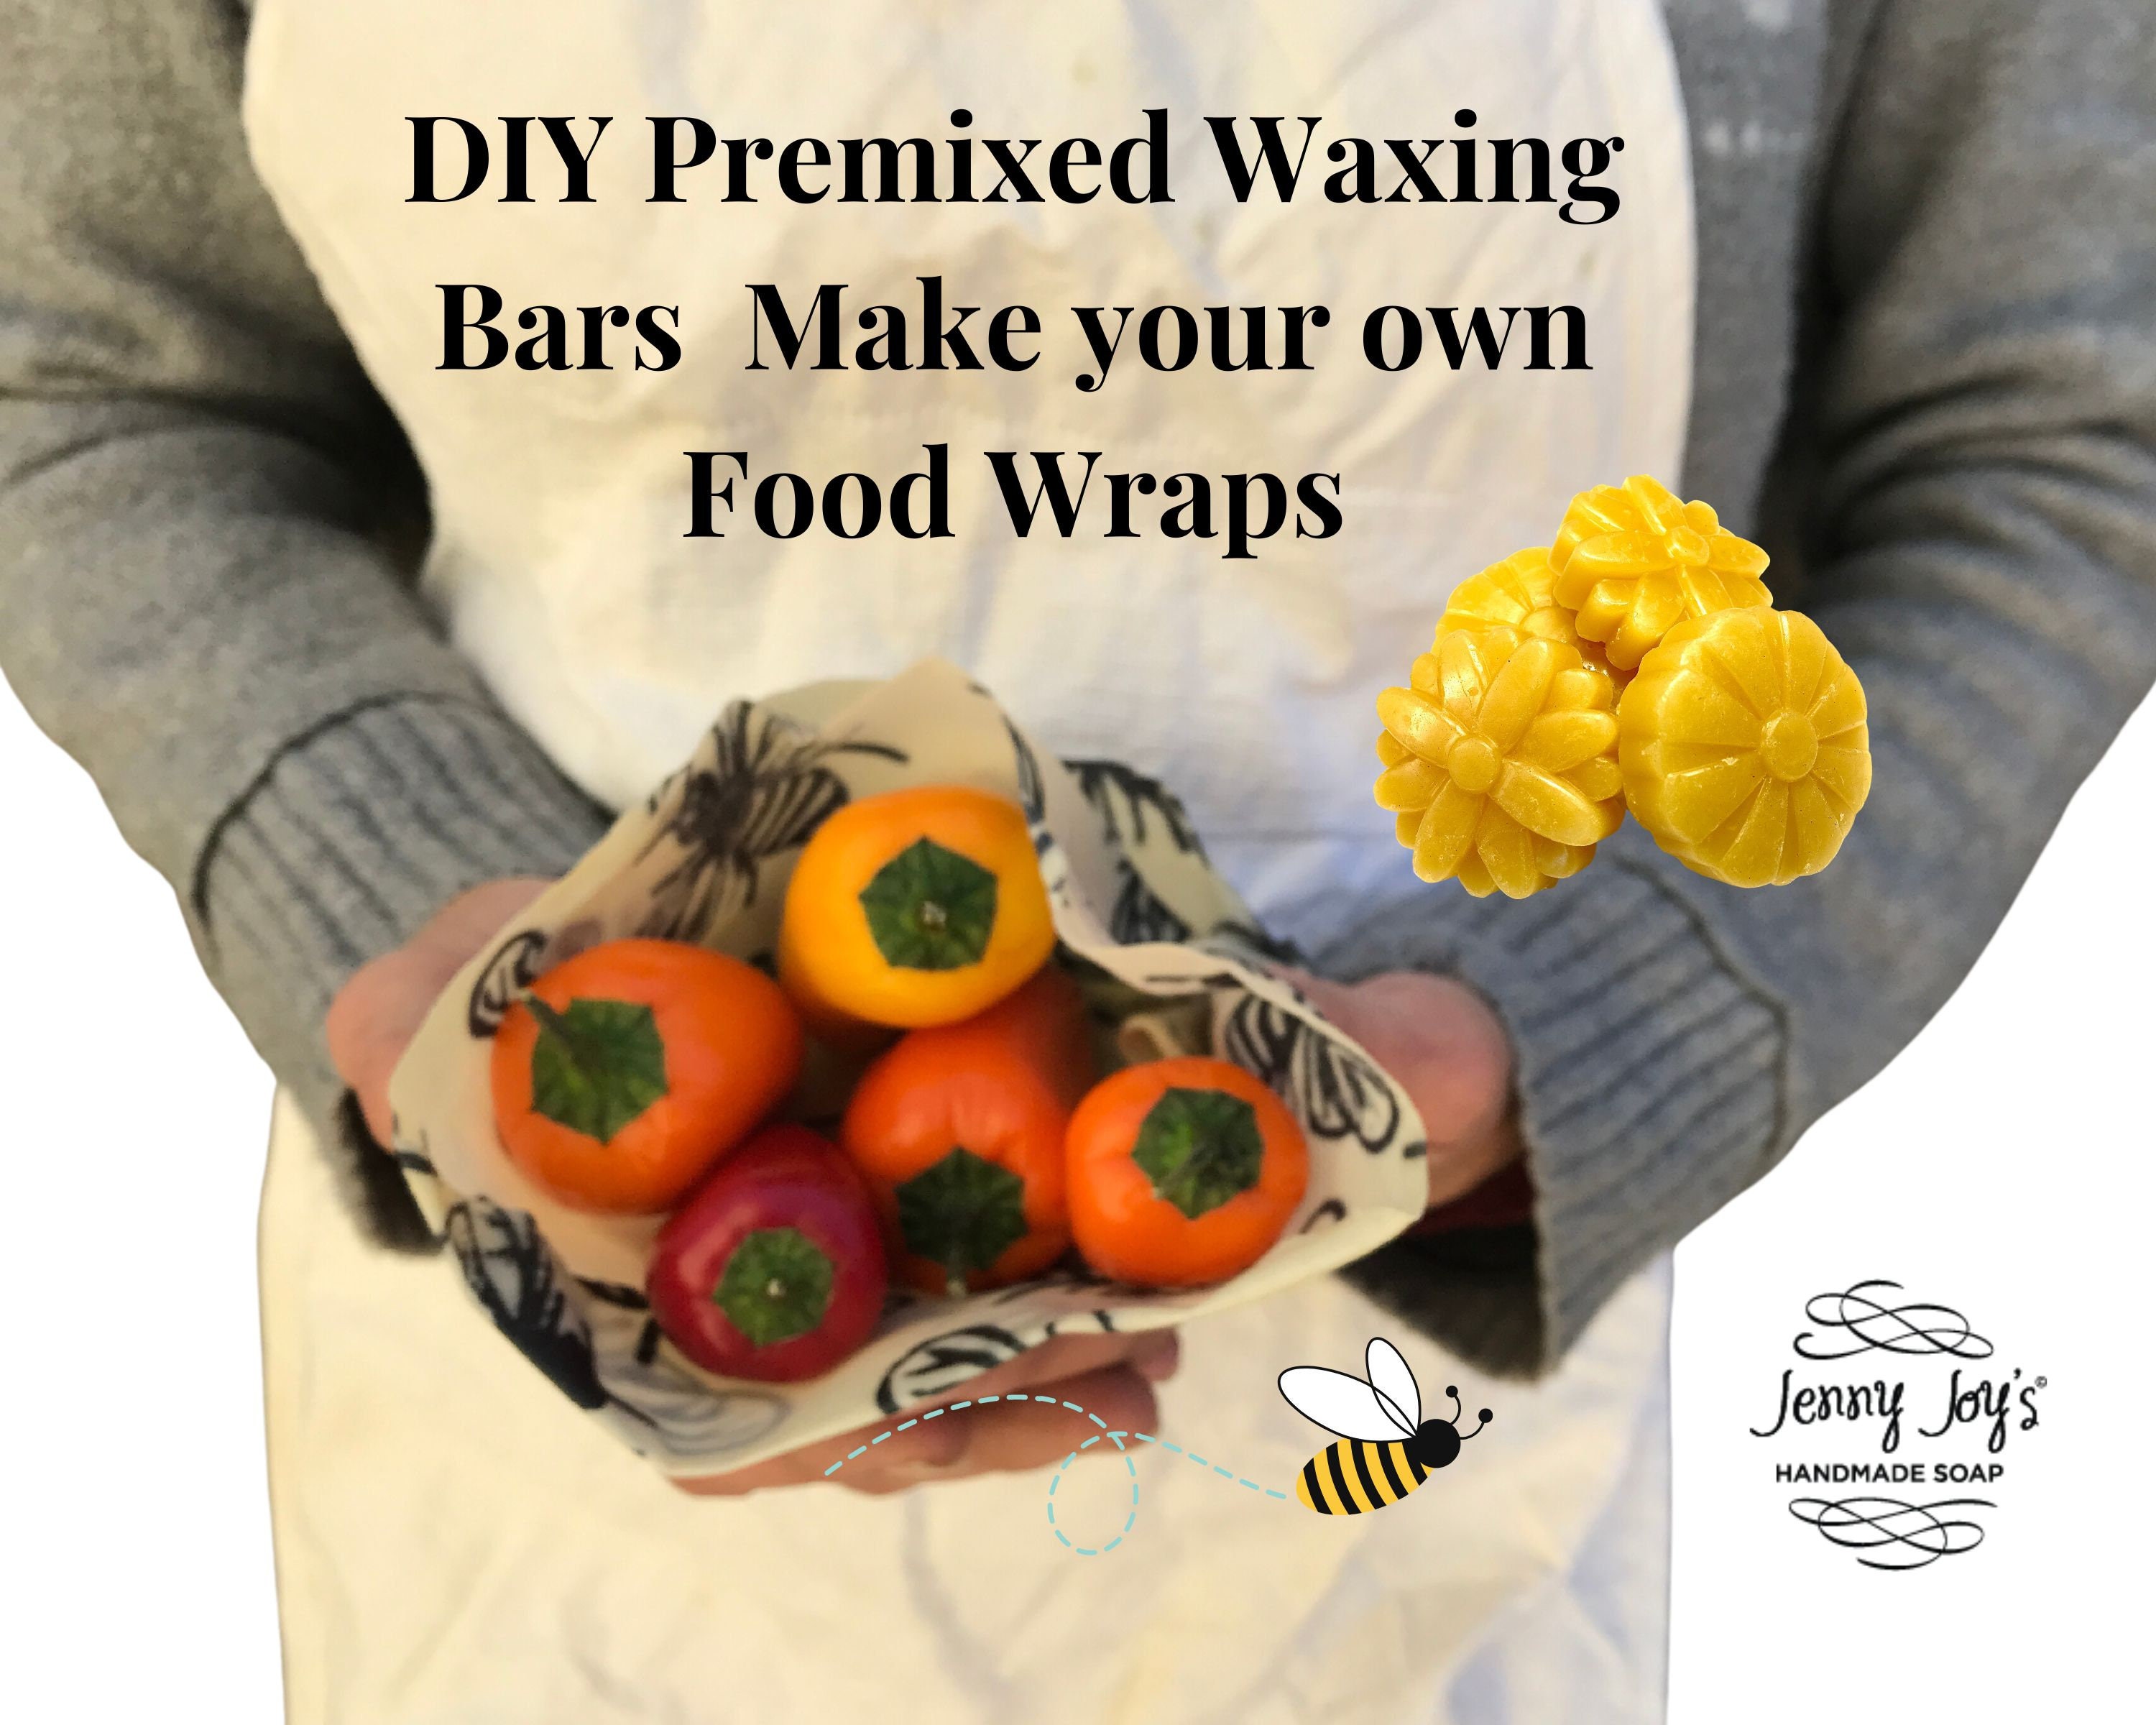 Pine Rosin for DIY Beeswax Wraps